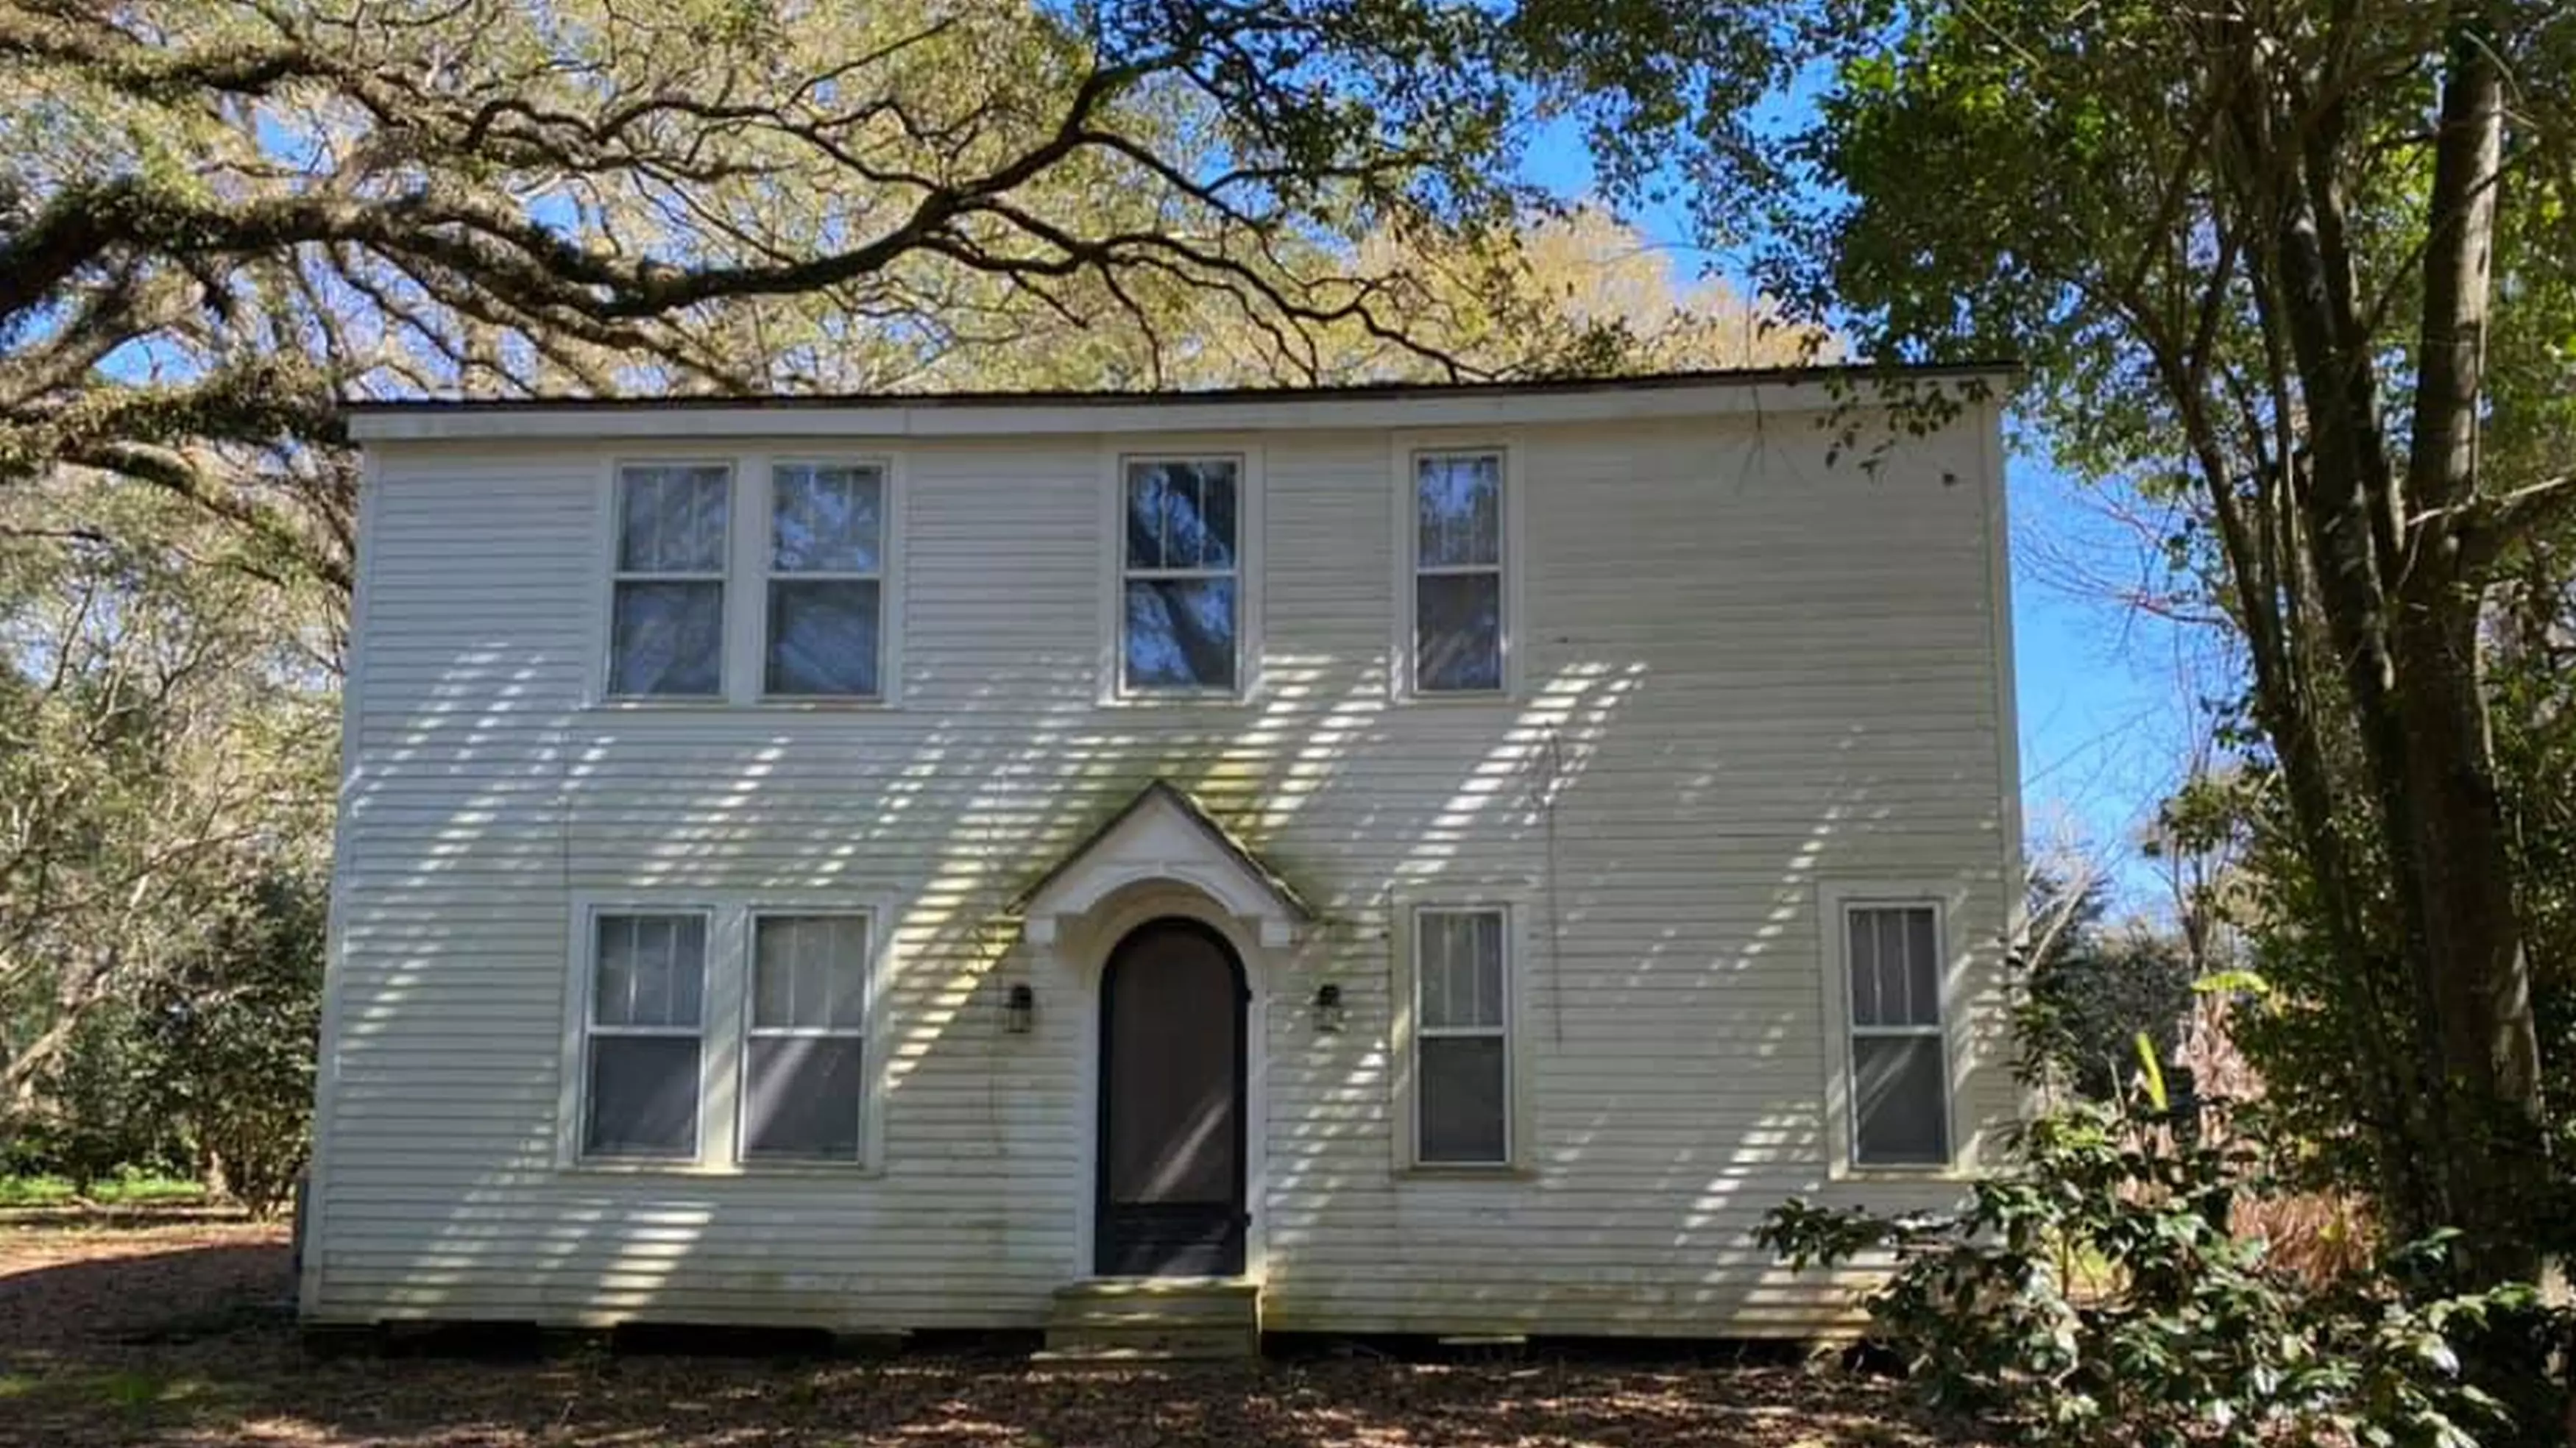 Haunted House Is Being Given Away For Free As People Are Too Scared To Live There